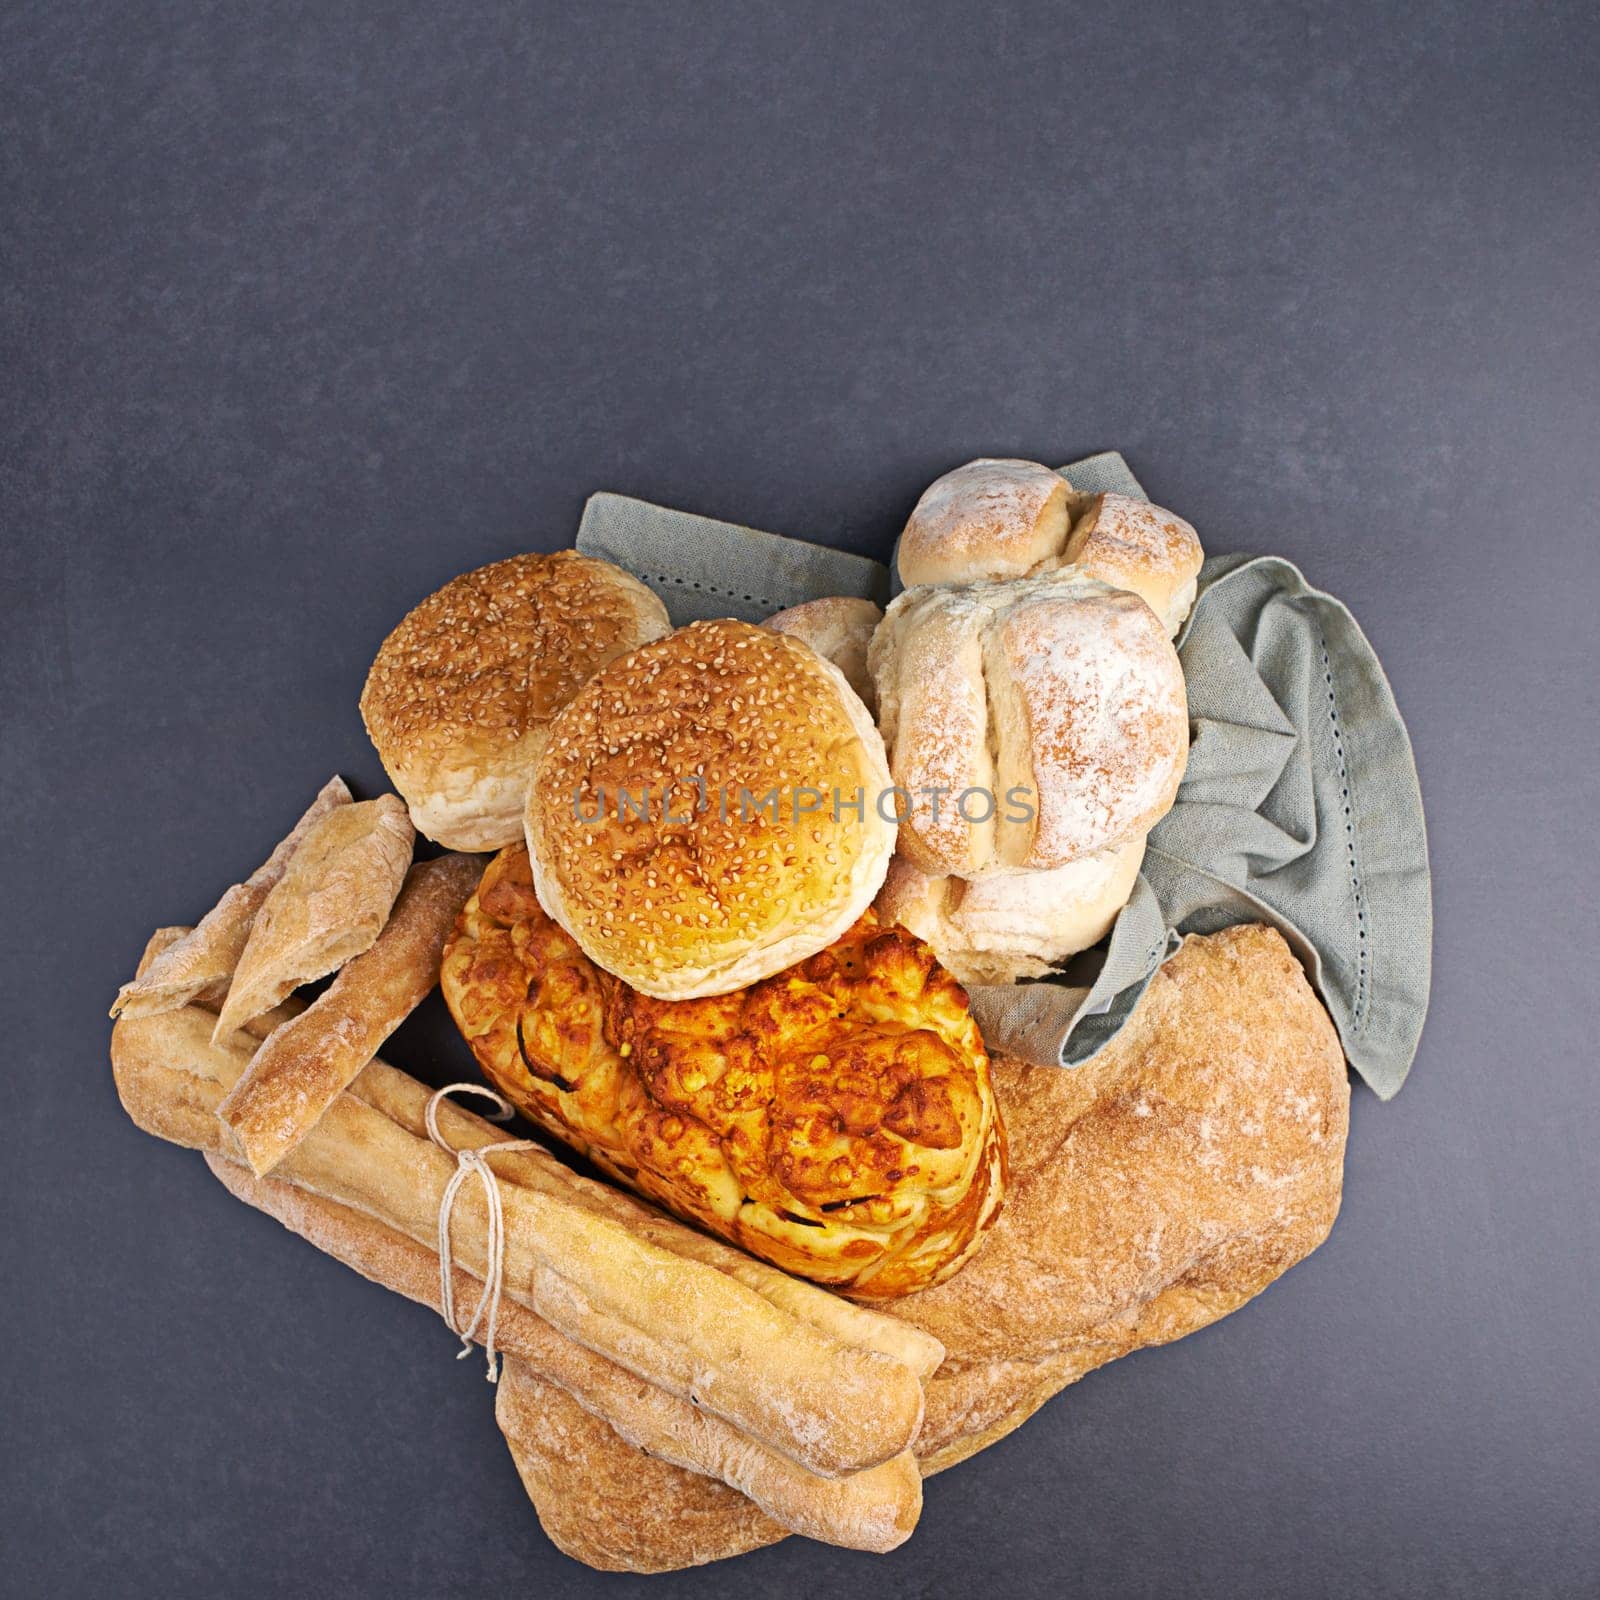 Group, bread and roll by dark background for bakery, sandwich and Italian food on surface with carbs. Bun, baguette and gluten free with wheat on countertop for healthy eating, hamburger and focaccia.